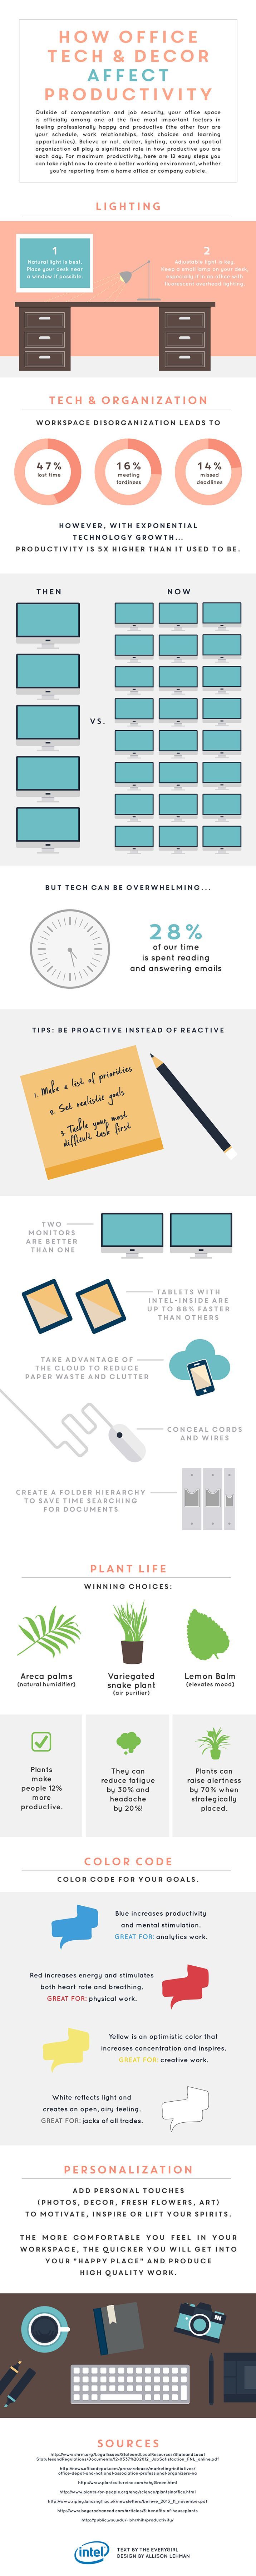 Reeeeally love this productivity boosters infographic, especially since Im about